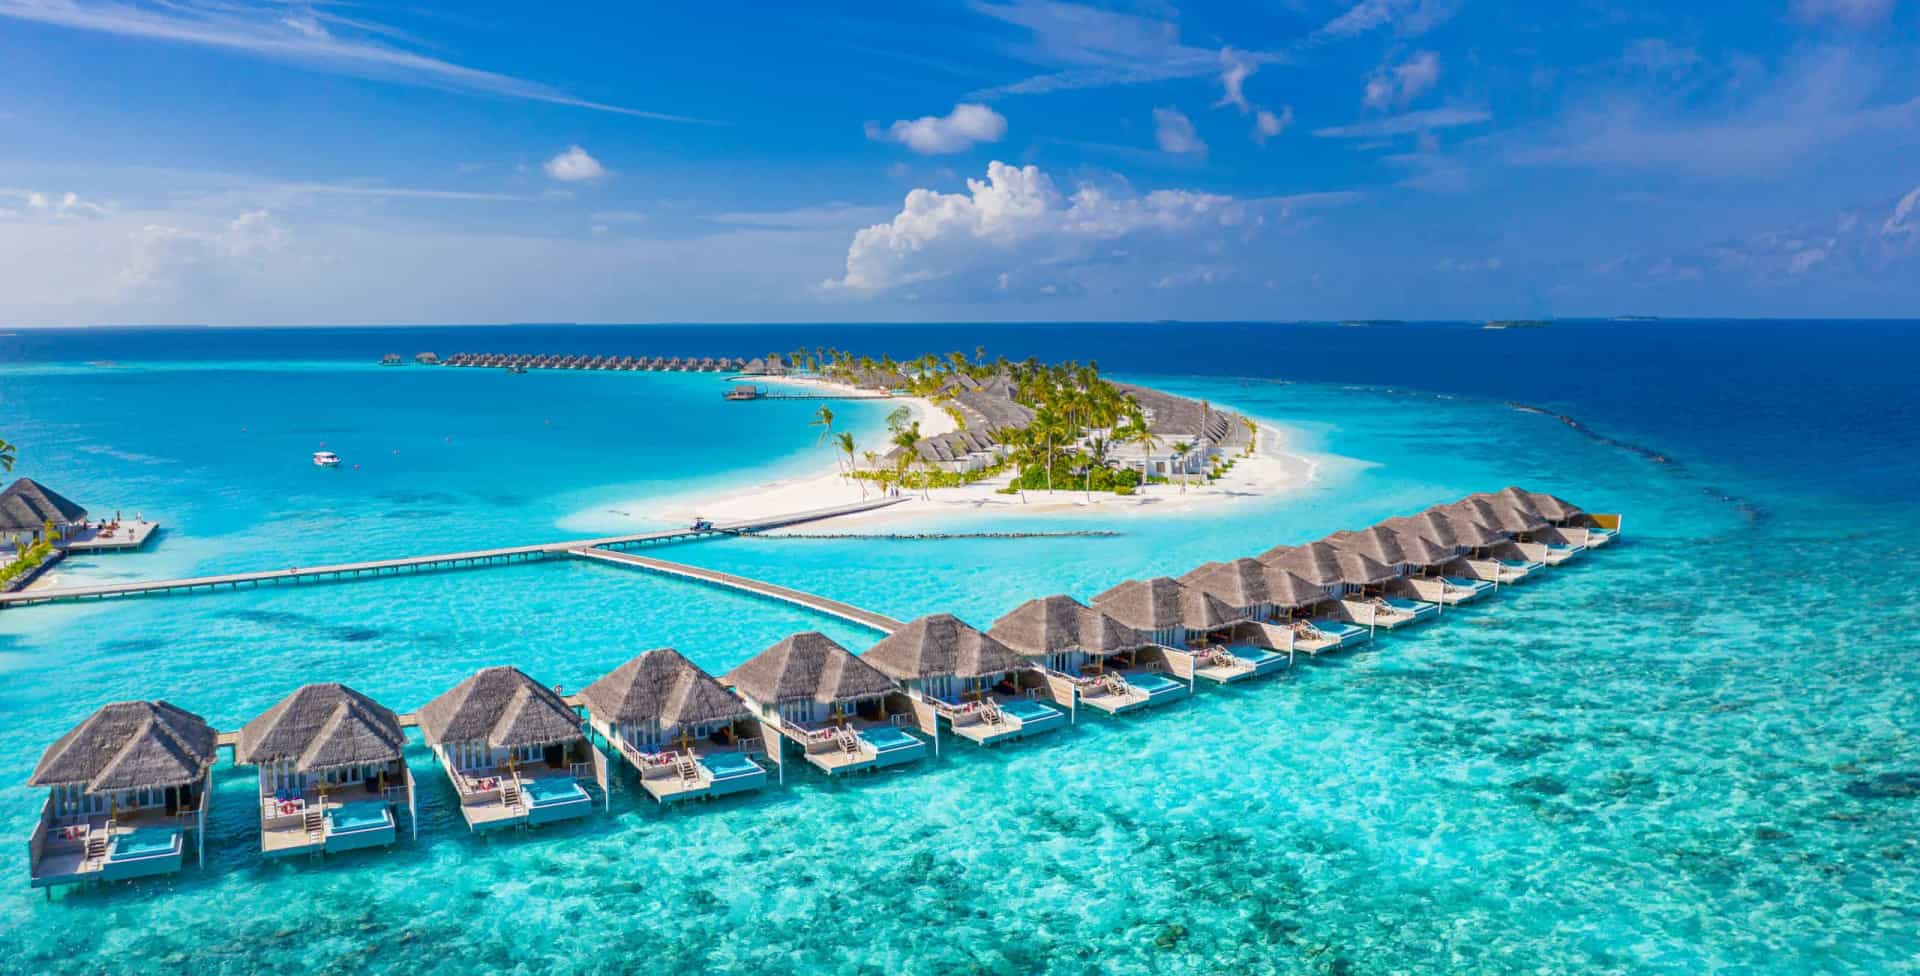 <p>Leos want to feel like royalty, and a luxurious destination like the Maldives is everything they crave. A Leos dream would include an overwater bungalow with a private pool and spa services. Pure Leo luxury!</p>